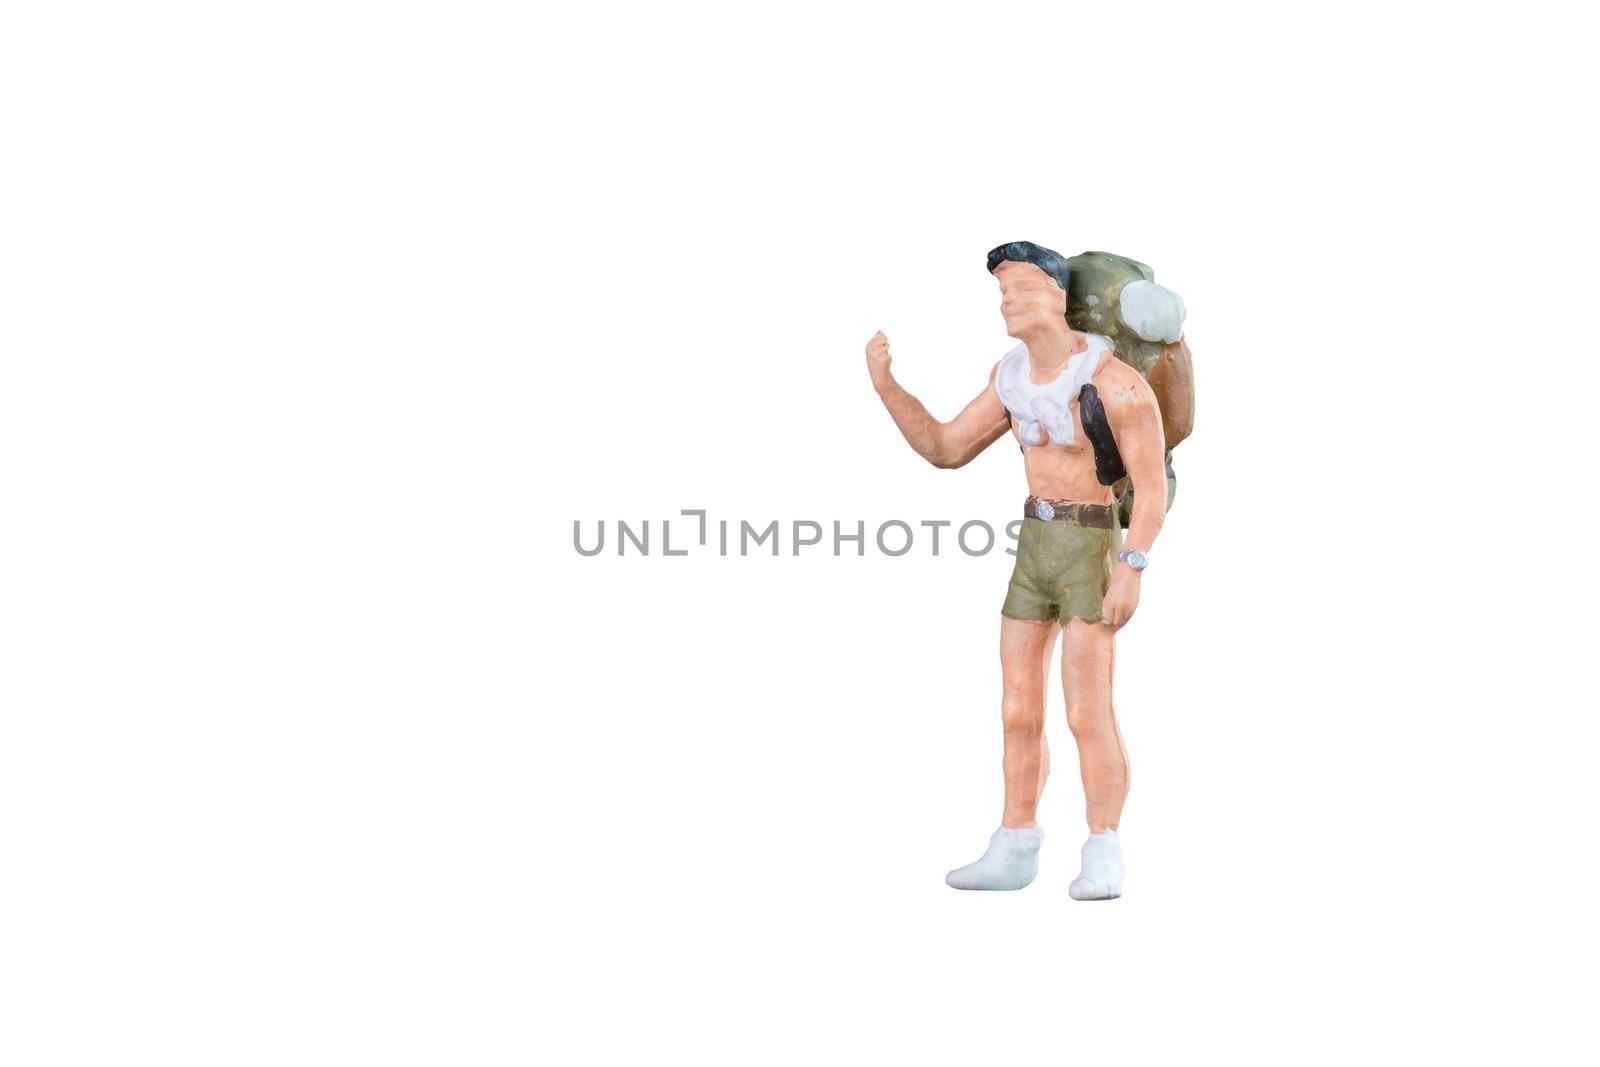 Close up of Miniature backpacker and tourist people isolated with clipping path on white background.Elegant Design with copy space for placement your text, mock up for business and travel concept